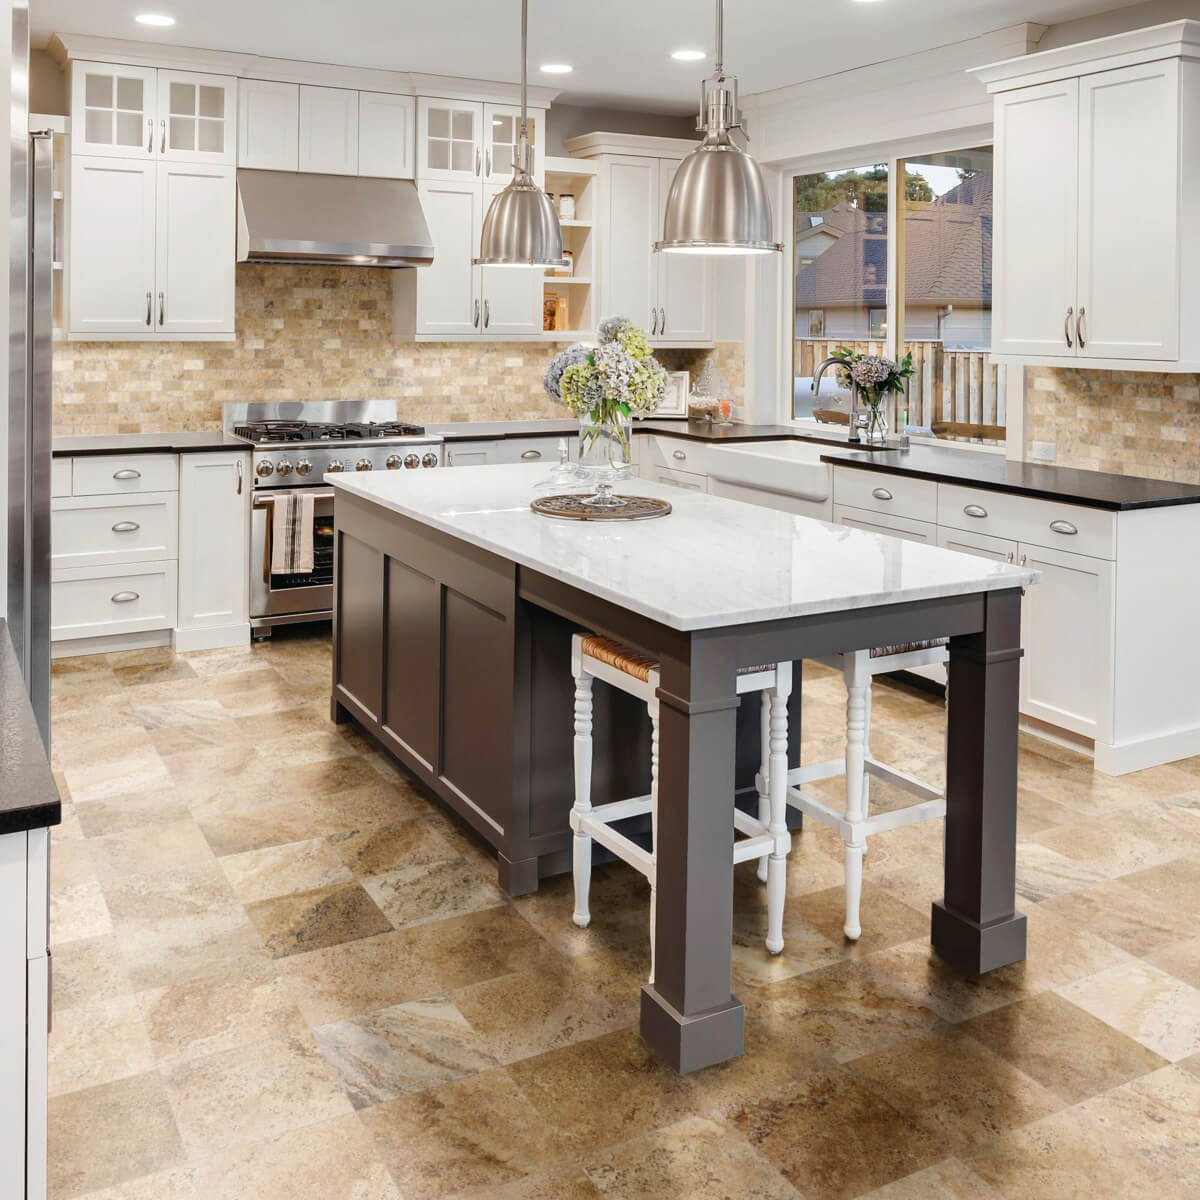 Cabinets & countertop | About Floors N' More